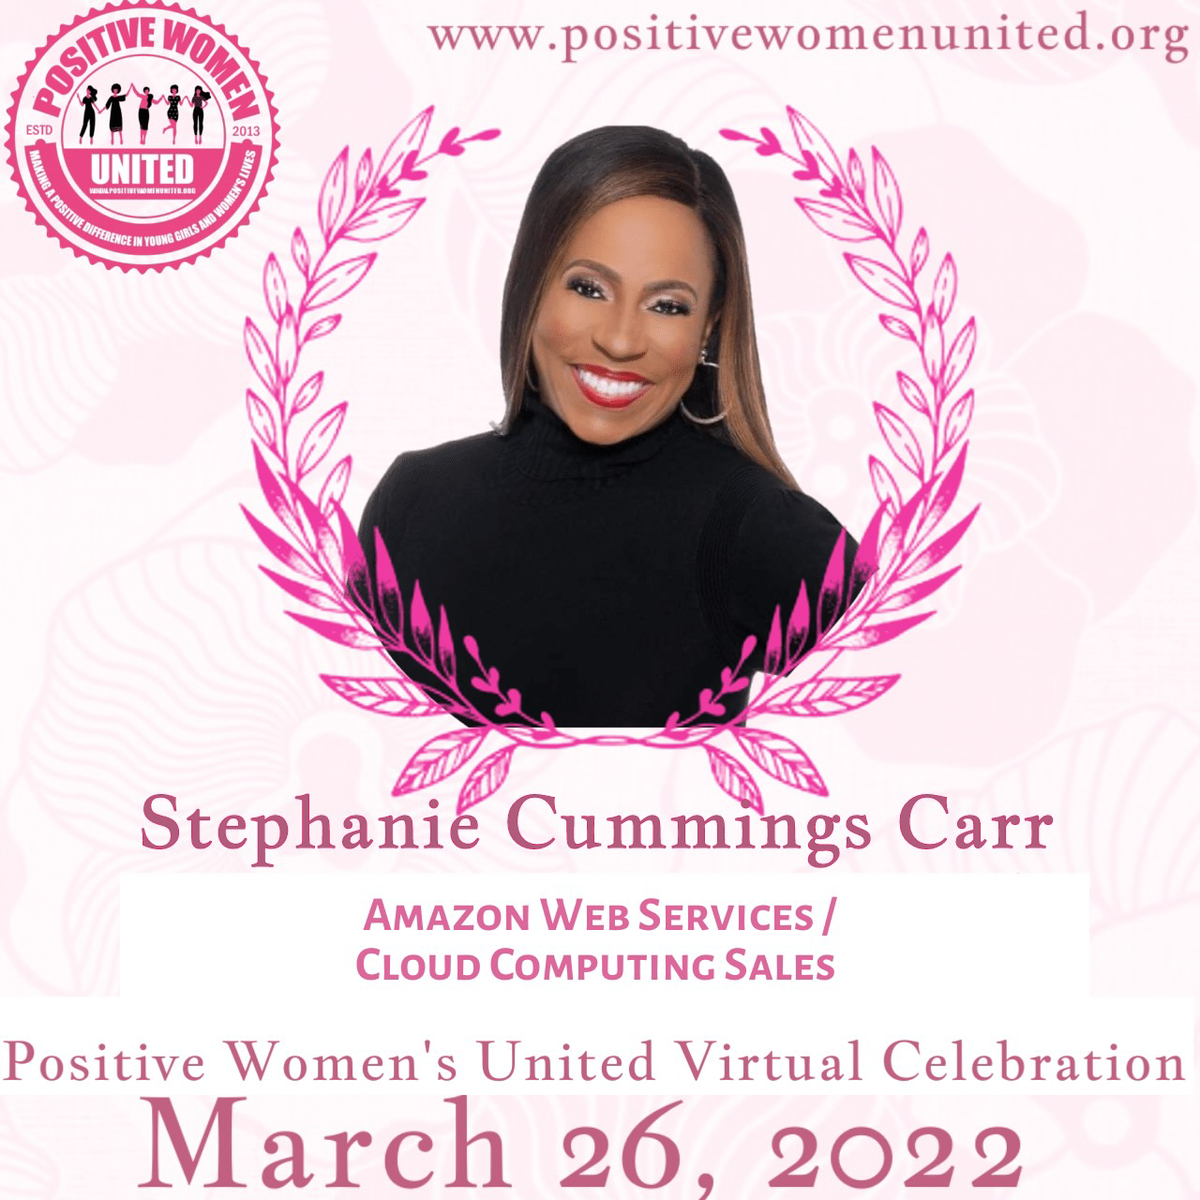 Women’s History Month Event: Mrs. Stephanie Cummings-Carr!